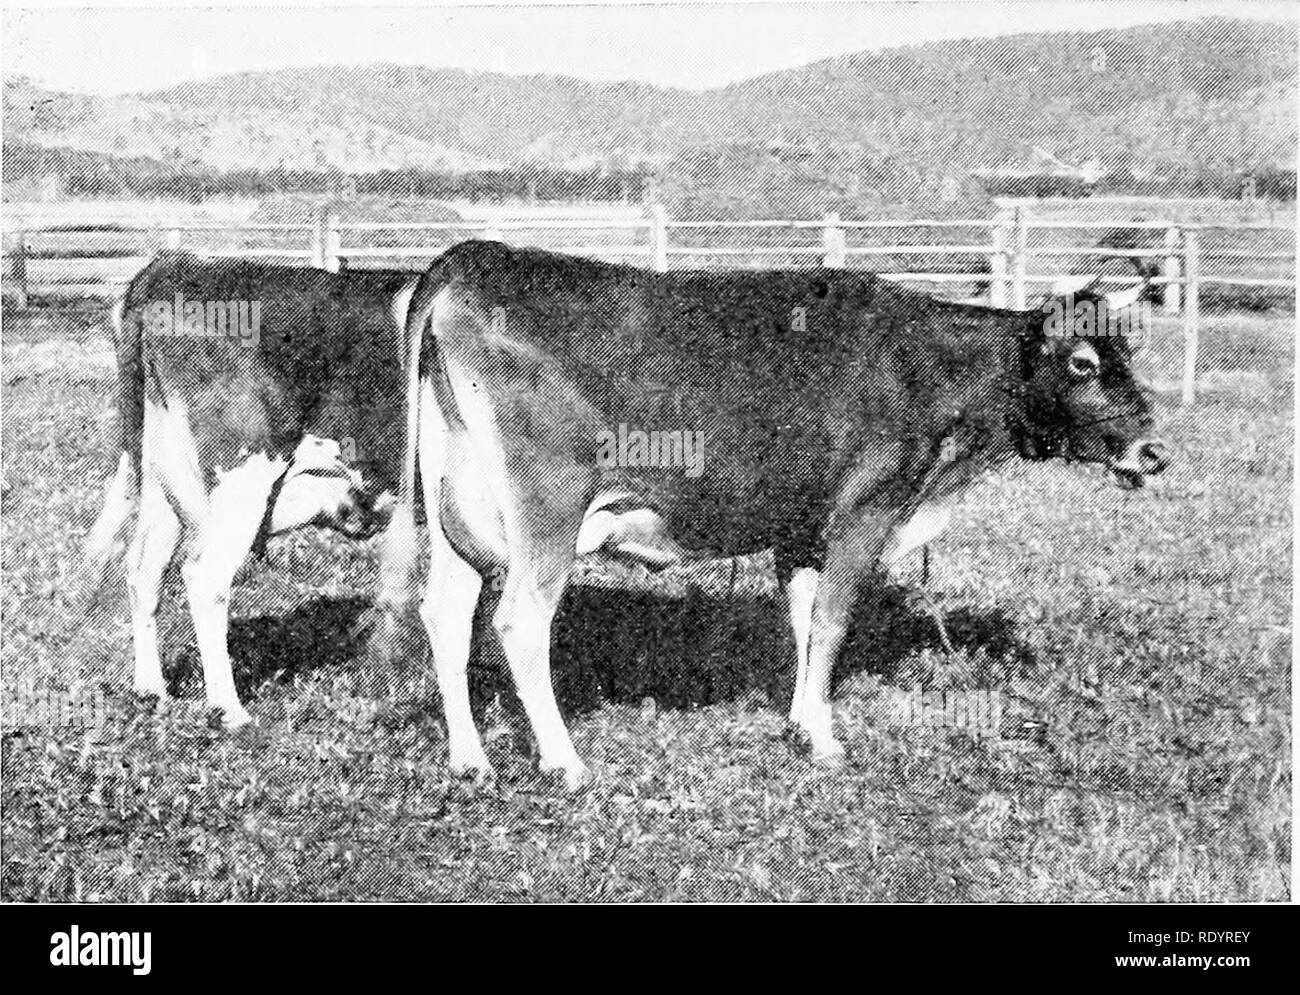 . The Guernsey breed. Guernsey cattle. 262 The Guernsey Breed. -'* ST;-- MiRnonette 7th 114 fAustralian Guernsey Her-l Cook) an.l La (&quot;olomlit 3d 92 (Australian Guernsey Herd Book). First named in foreground, daughter of Masher 63, R. A. A. S. Ruby, the dam of Coral, gave 6,810 pounds milk, which yielded 287 pounds butter in a milking period of 321 days. The summary goes on to say that, as far as the records go, the Guernsey has produced the best results of all the dairy breeds used in the crosses. More work has been done with the Guernsey than with the other breeds but some work was done Stock Photo